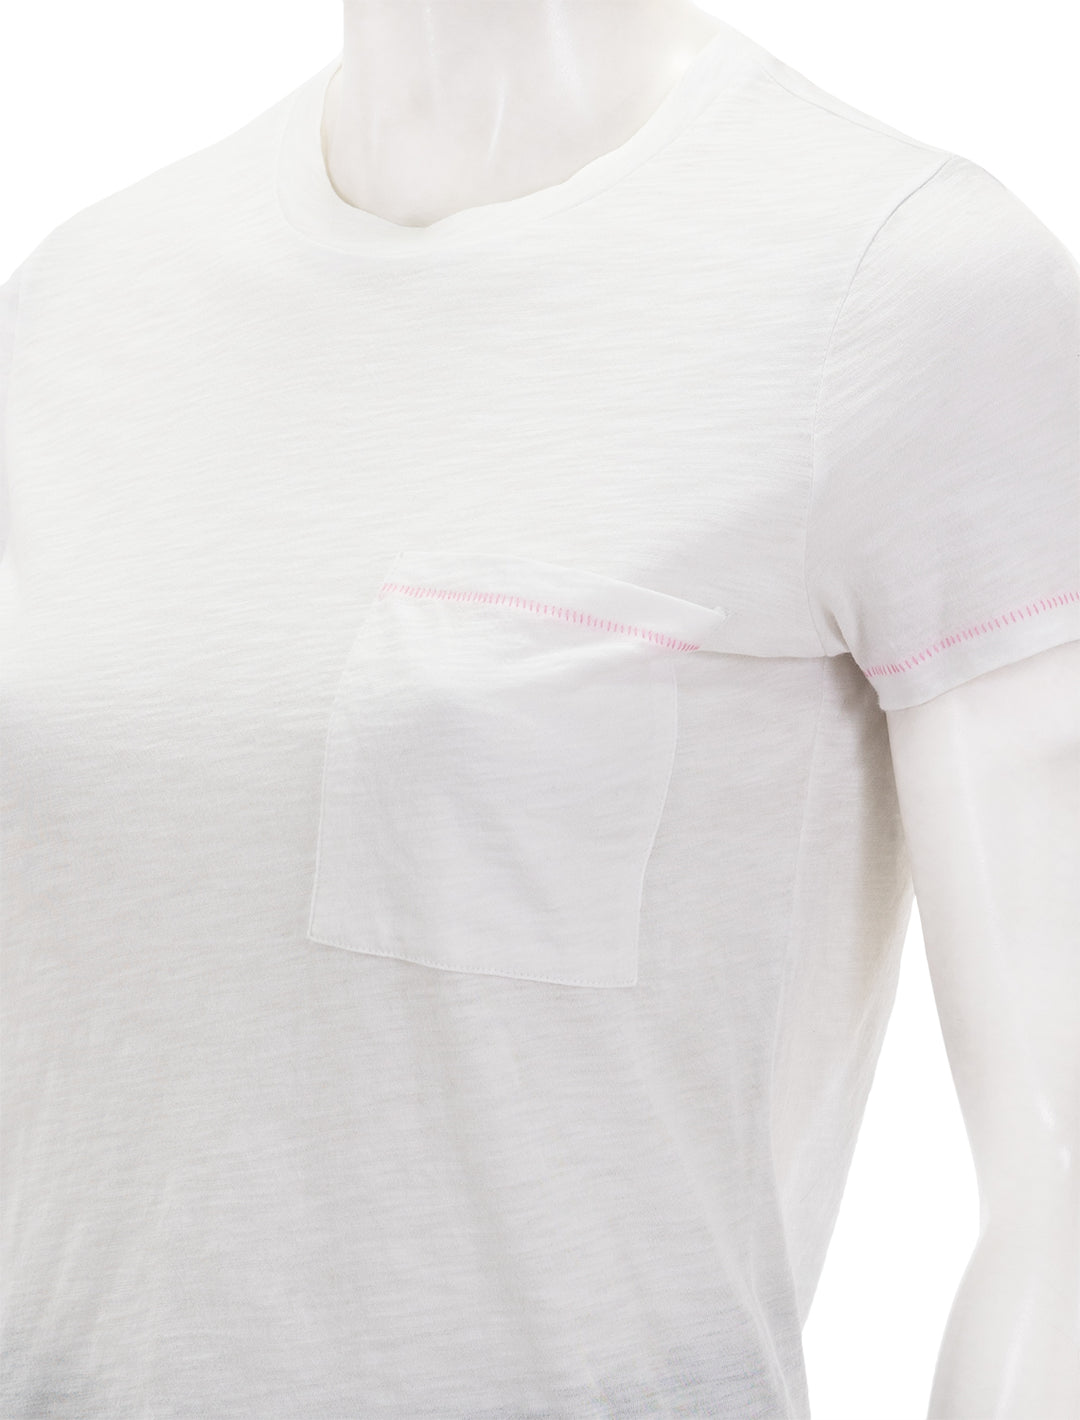 Close-up view of Goldie Lewinter's contrast stitch pocket boy tee in white and pink.